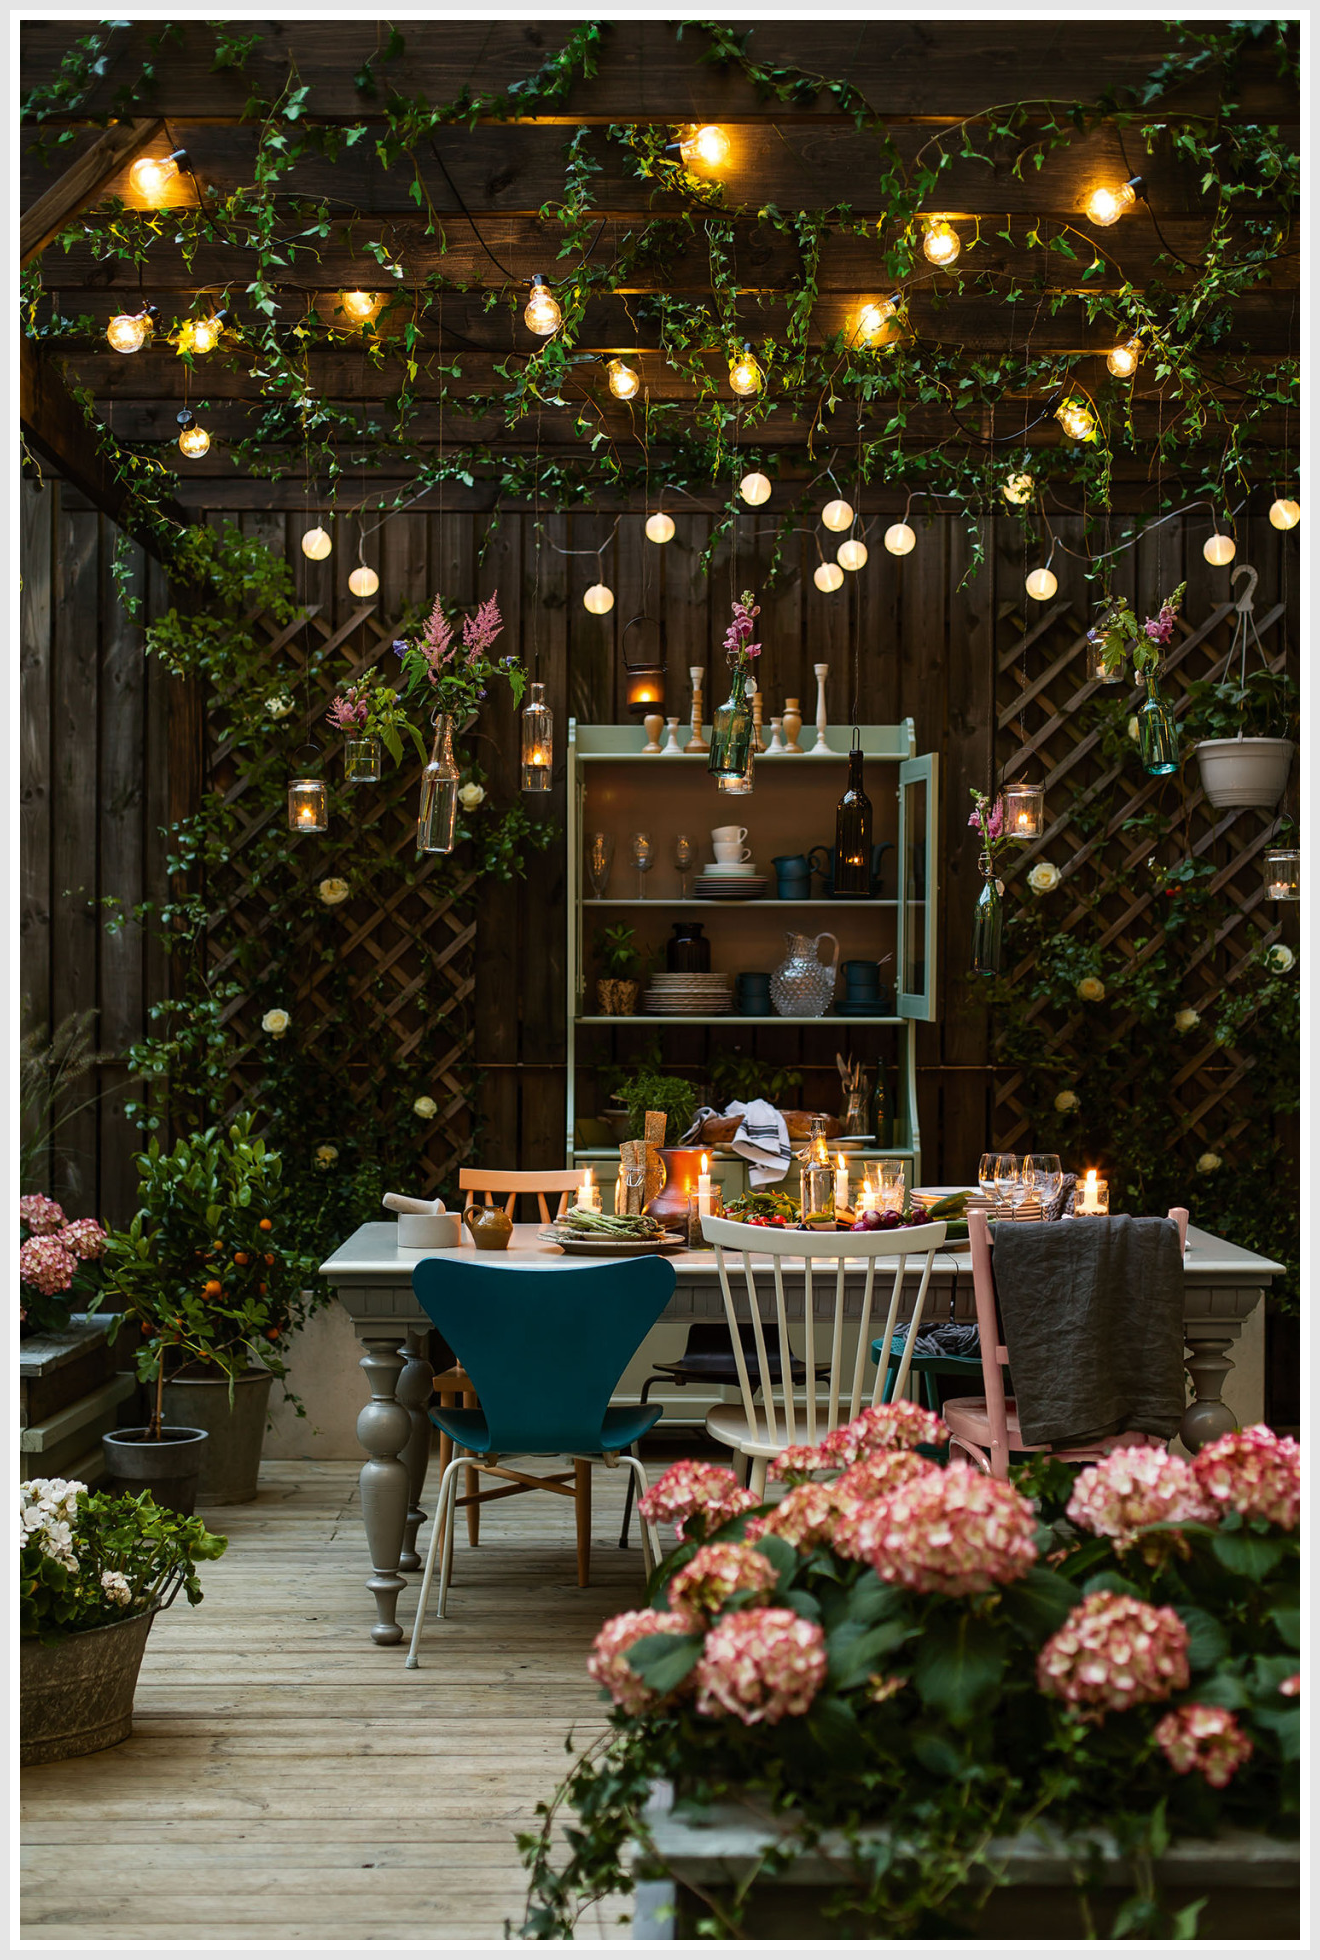 Outdoor lighting fixtures and a table with chairs in a garden setting with trees and bushes in the background.